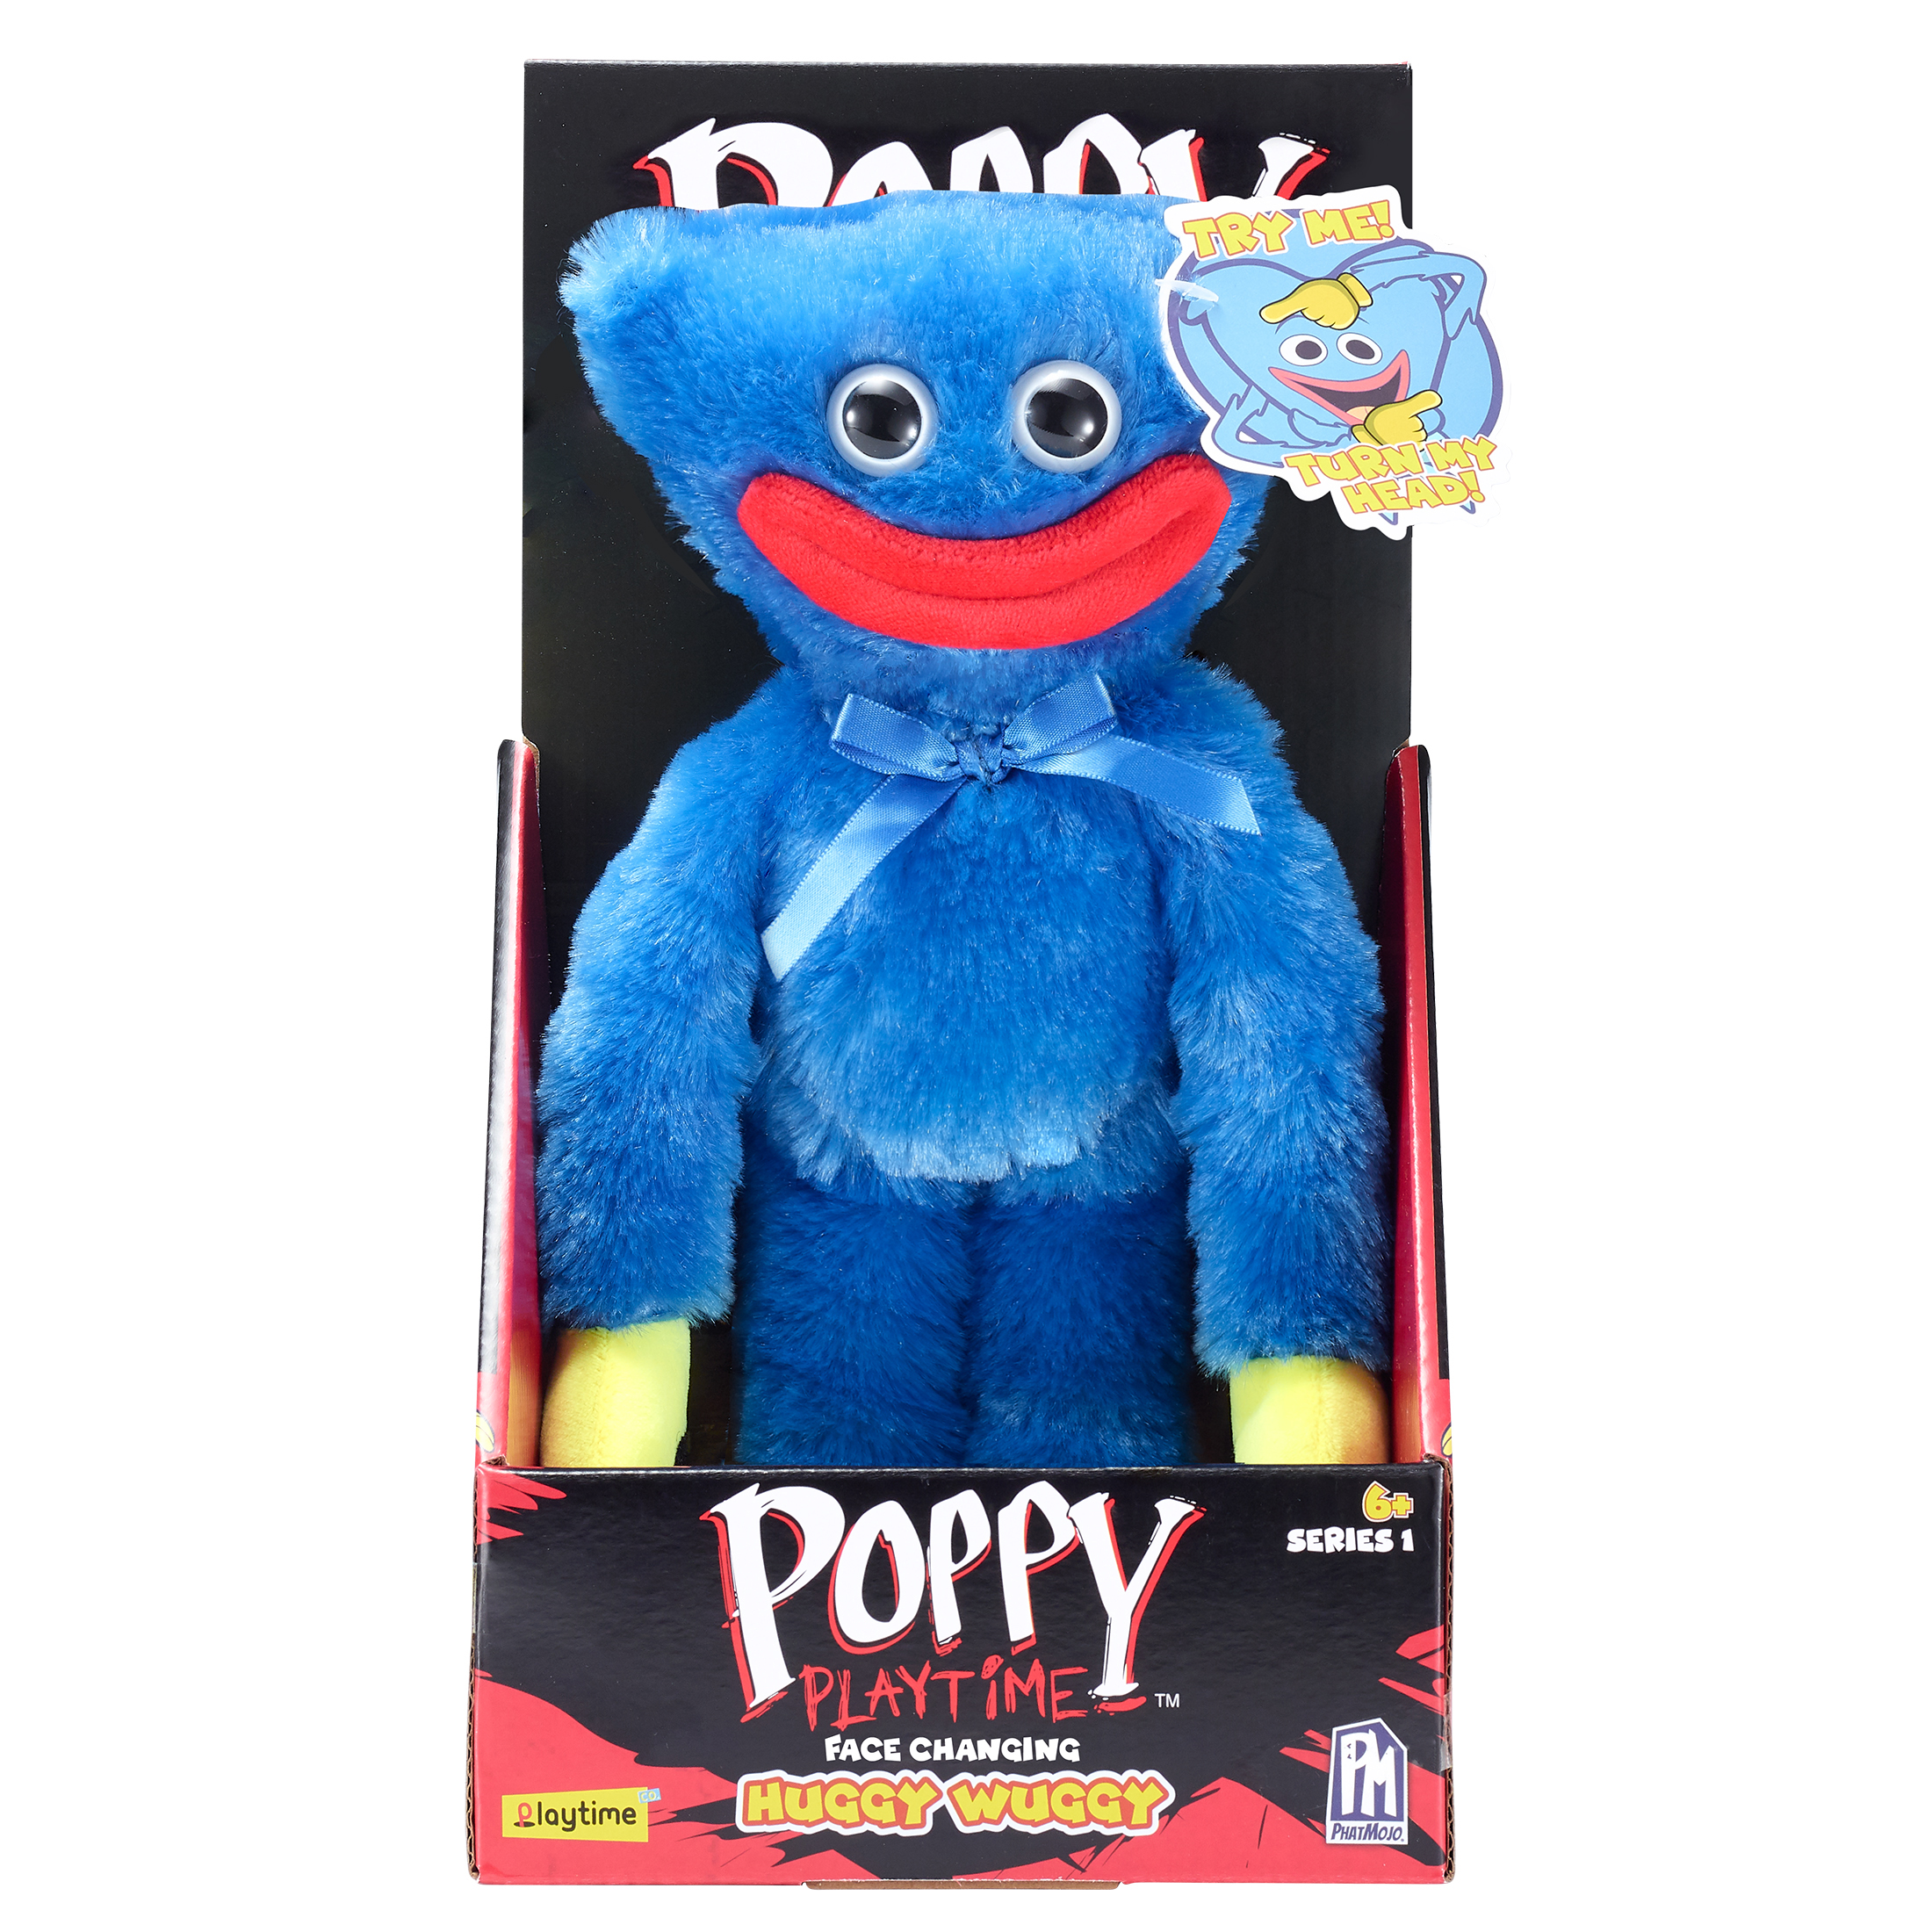 Poppy Playtime Plush 14 inch Face-Changing Huggy Wuggy (Series 1) - image 1 of 5